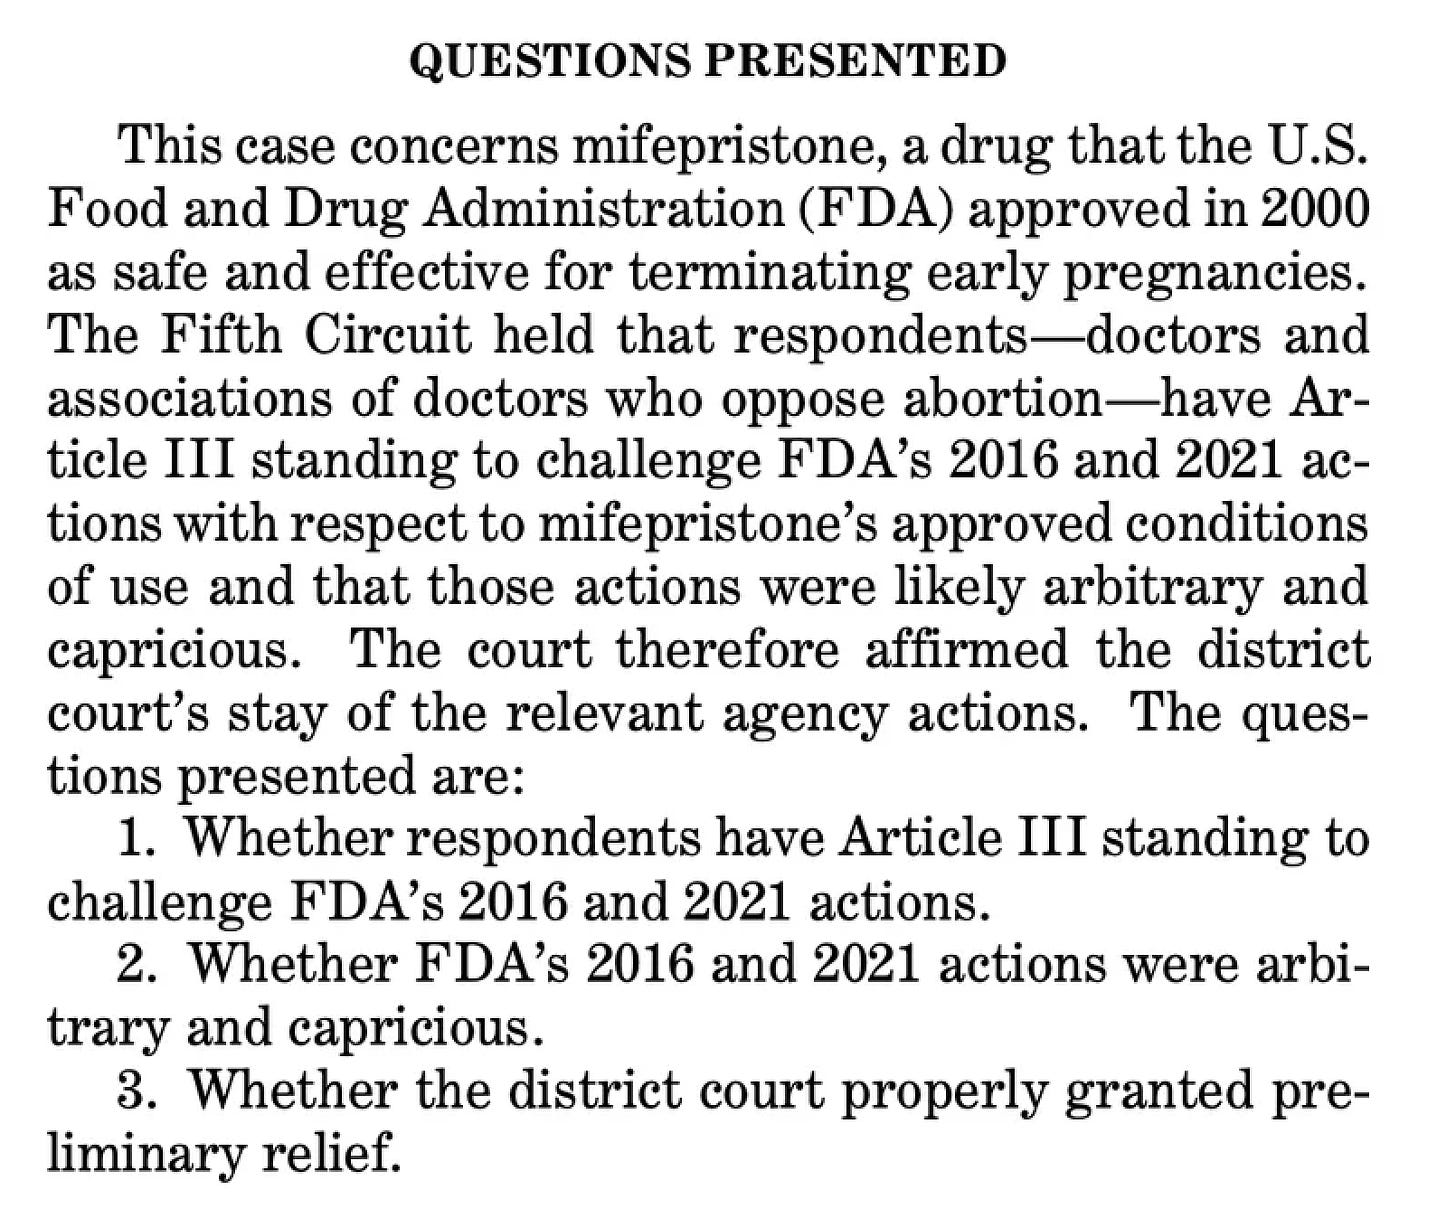 (I) QUESTIONS PRESENTED This case concerns mifepristone, a drug that the U.S. Food and Drug Administration (FDA) approved in 2000 as safe and effective for terminating early pregnancies. The Fifth Circuit held that respondents—doctors and associations of doctors who oppose abortion—have Ar- ticle III standing to challenge FDA’s 2016 and 2021 ac- tions with respect to mifepristone’s approved conditions of use and that those actions were likely arbitrary and capricious. The court therefore affirmed the district court’s stay of the relevant agency actions. The ques- tions presented are: 1. Whether respondents have Article III standing to challenge FDA’s 2016 and 2021 actions. 2. Whether FDA’s 2016 and 2021 actions were arbi- trary and capricious. 3. Whether the district court properly granted pre- liminary relief.